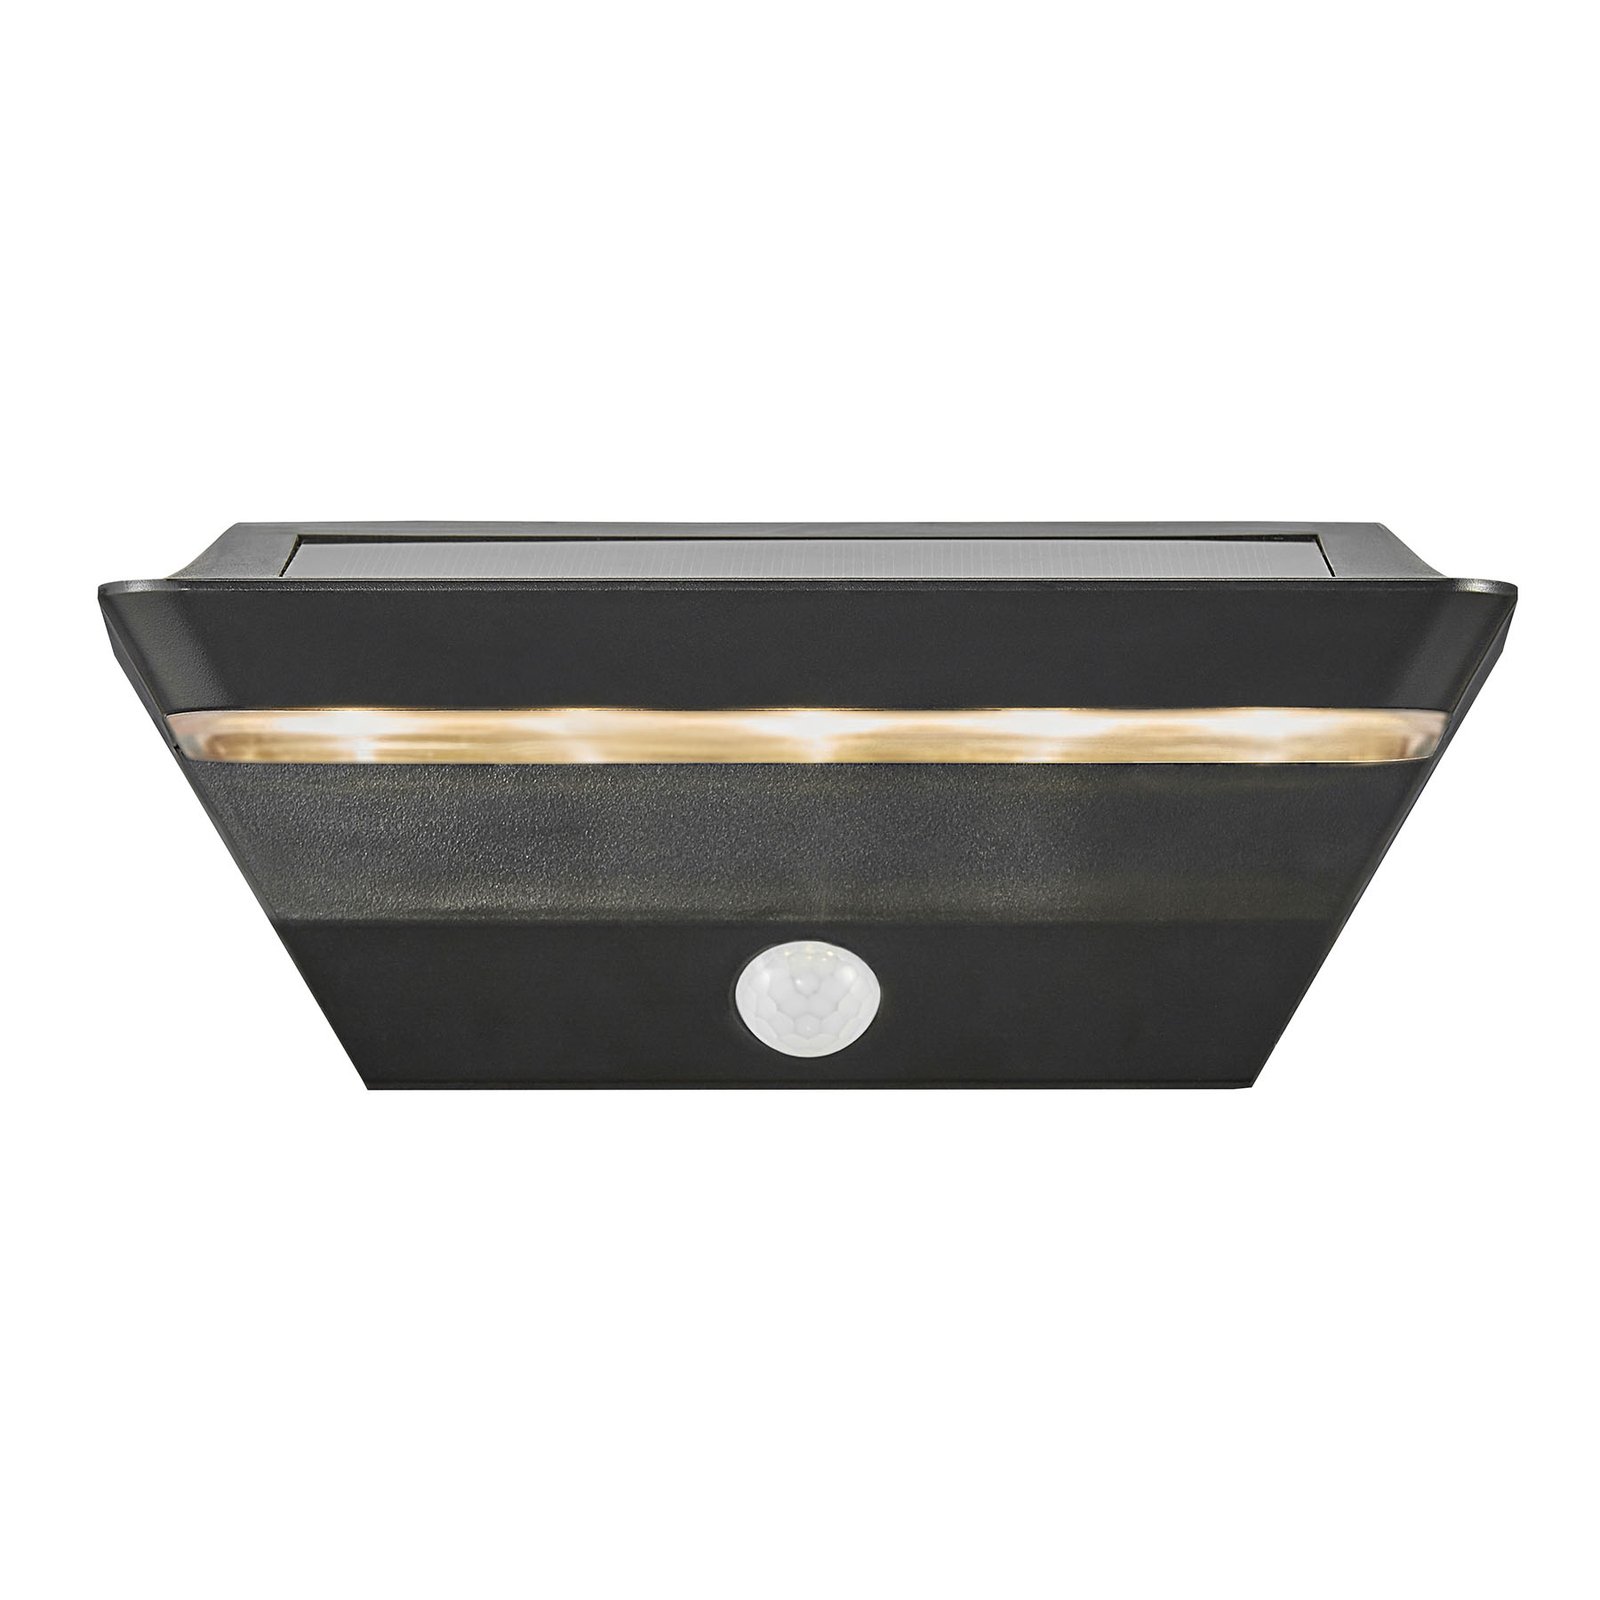 Agena LED solar wall light with motion detector